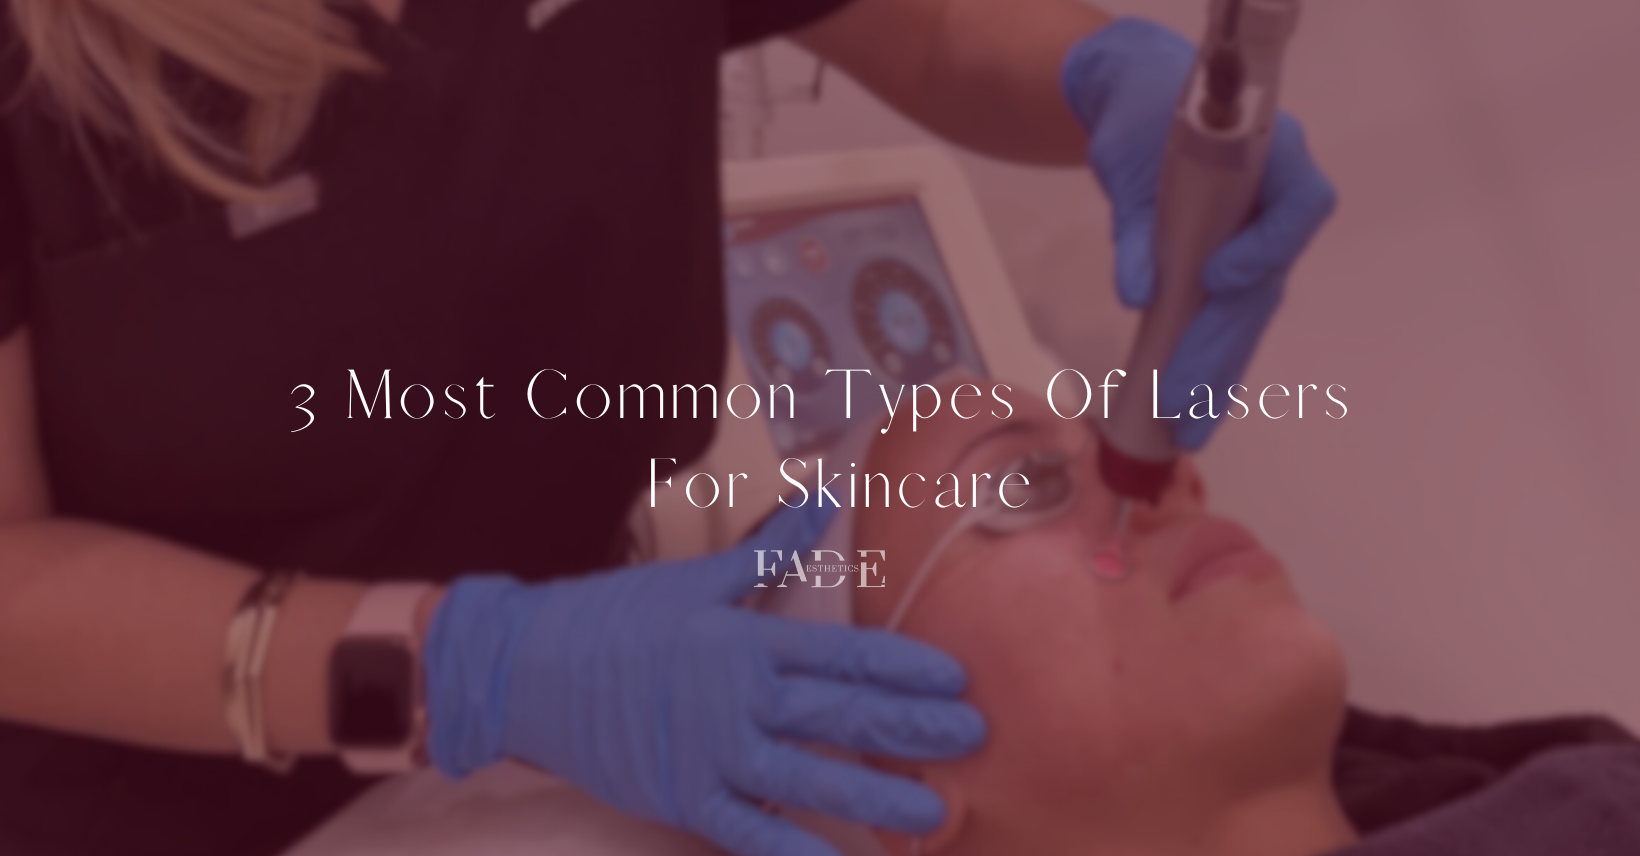 Advantages of Laser Acne Scar Removal